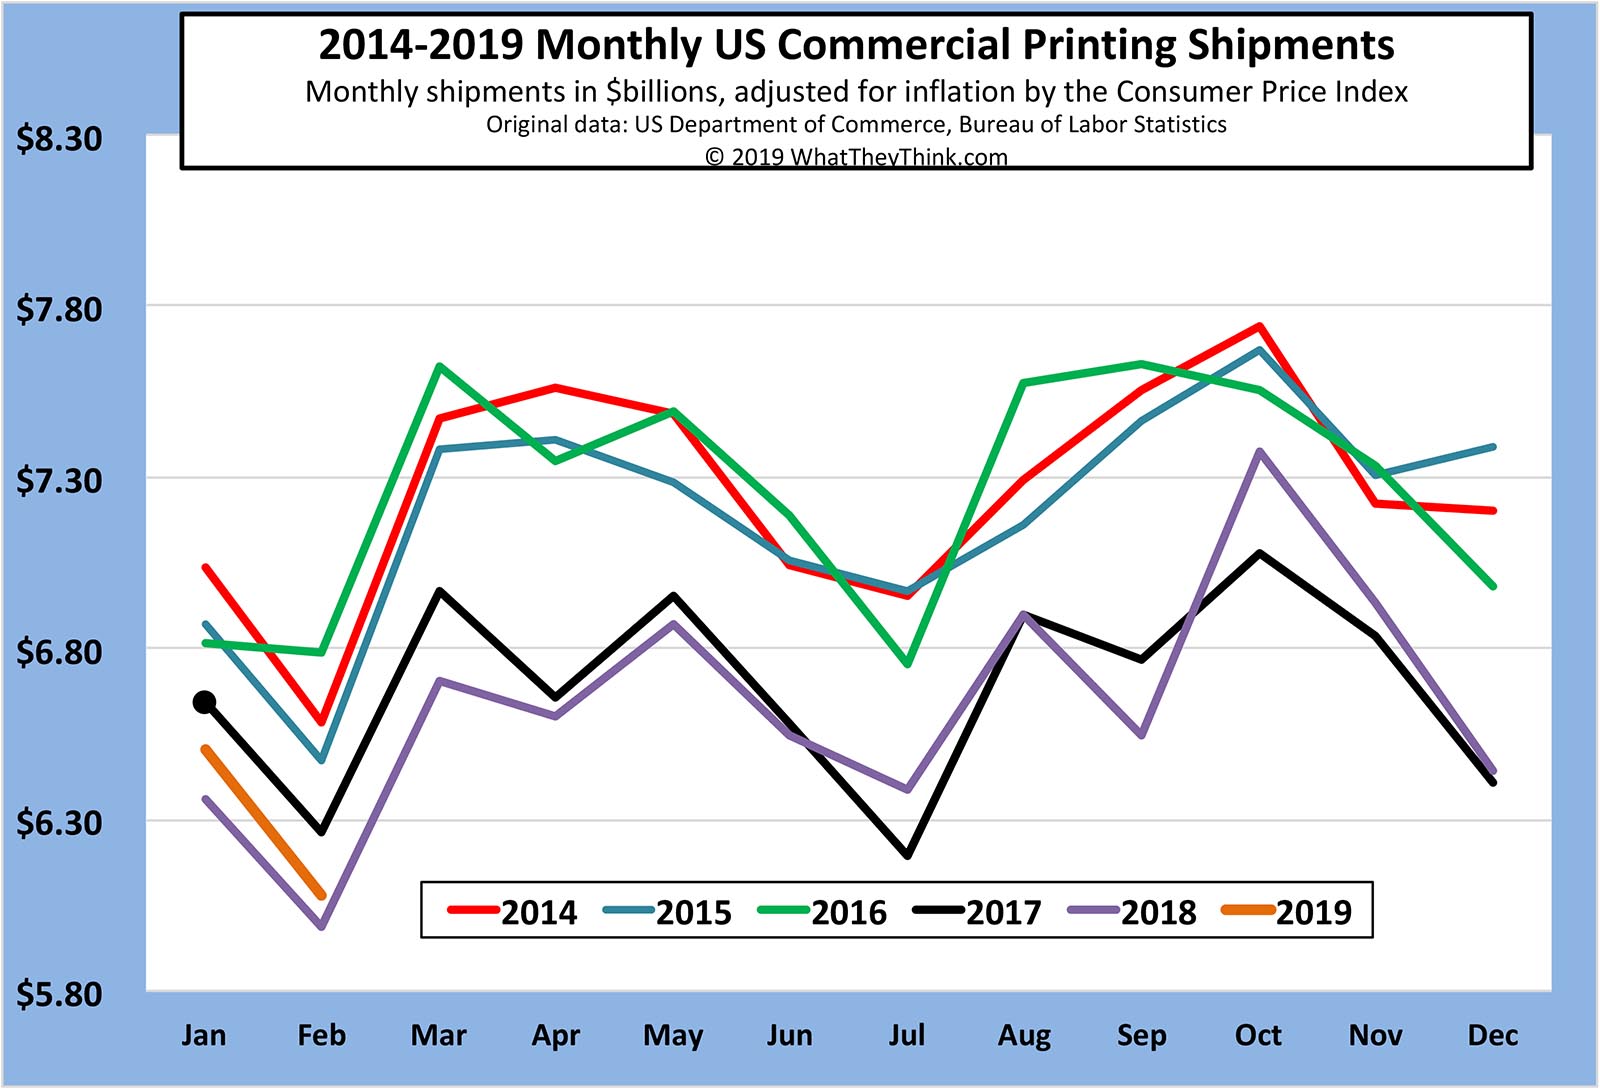 February 2019 Printing Shipments: Starting the Year Off on the Right Foot